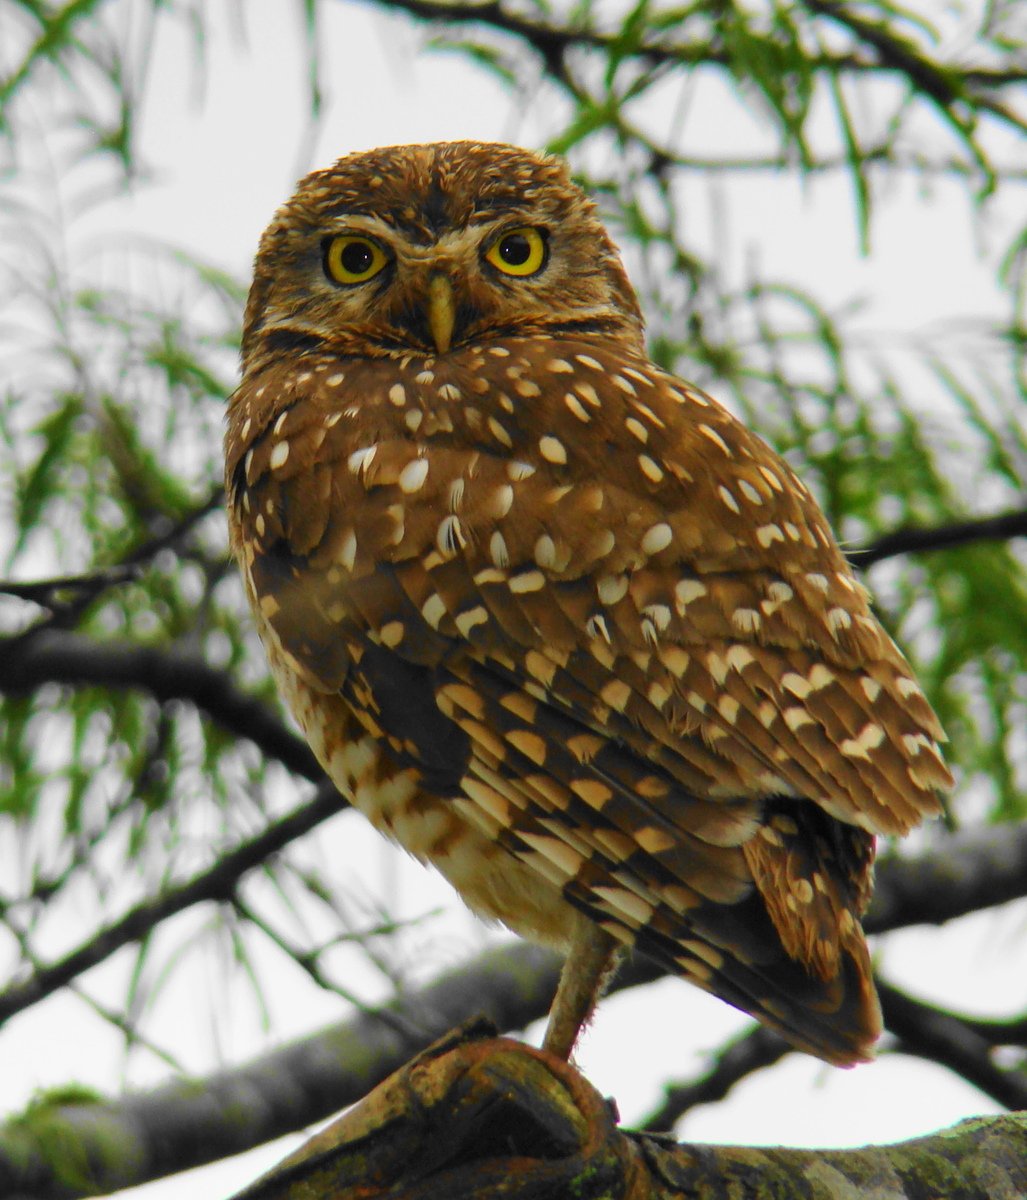 a close - up of an owl perched on a nch with very big eyes